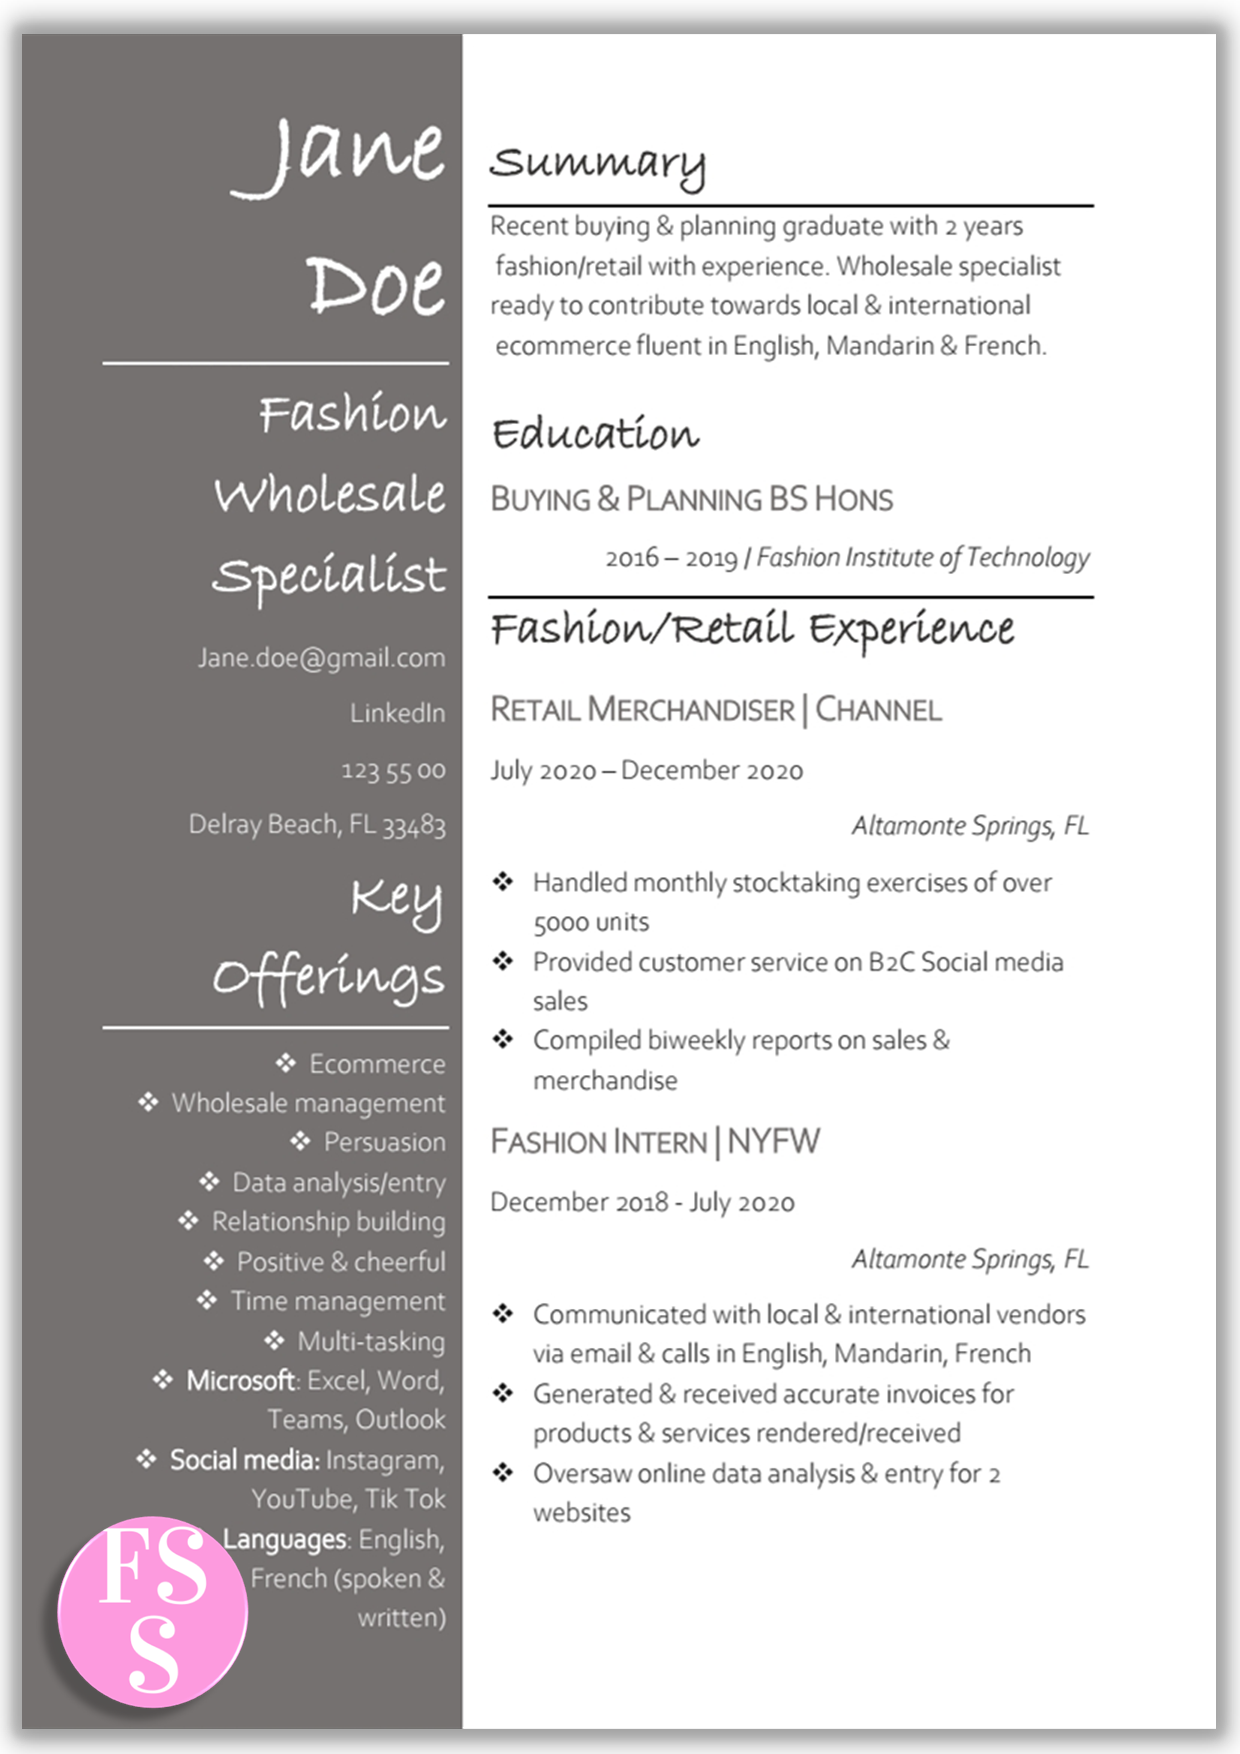 Struggling to write a fashion wholesale resume? This samples shows you how even with no experience. Perfect for interns, students & entry-level job searches.